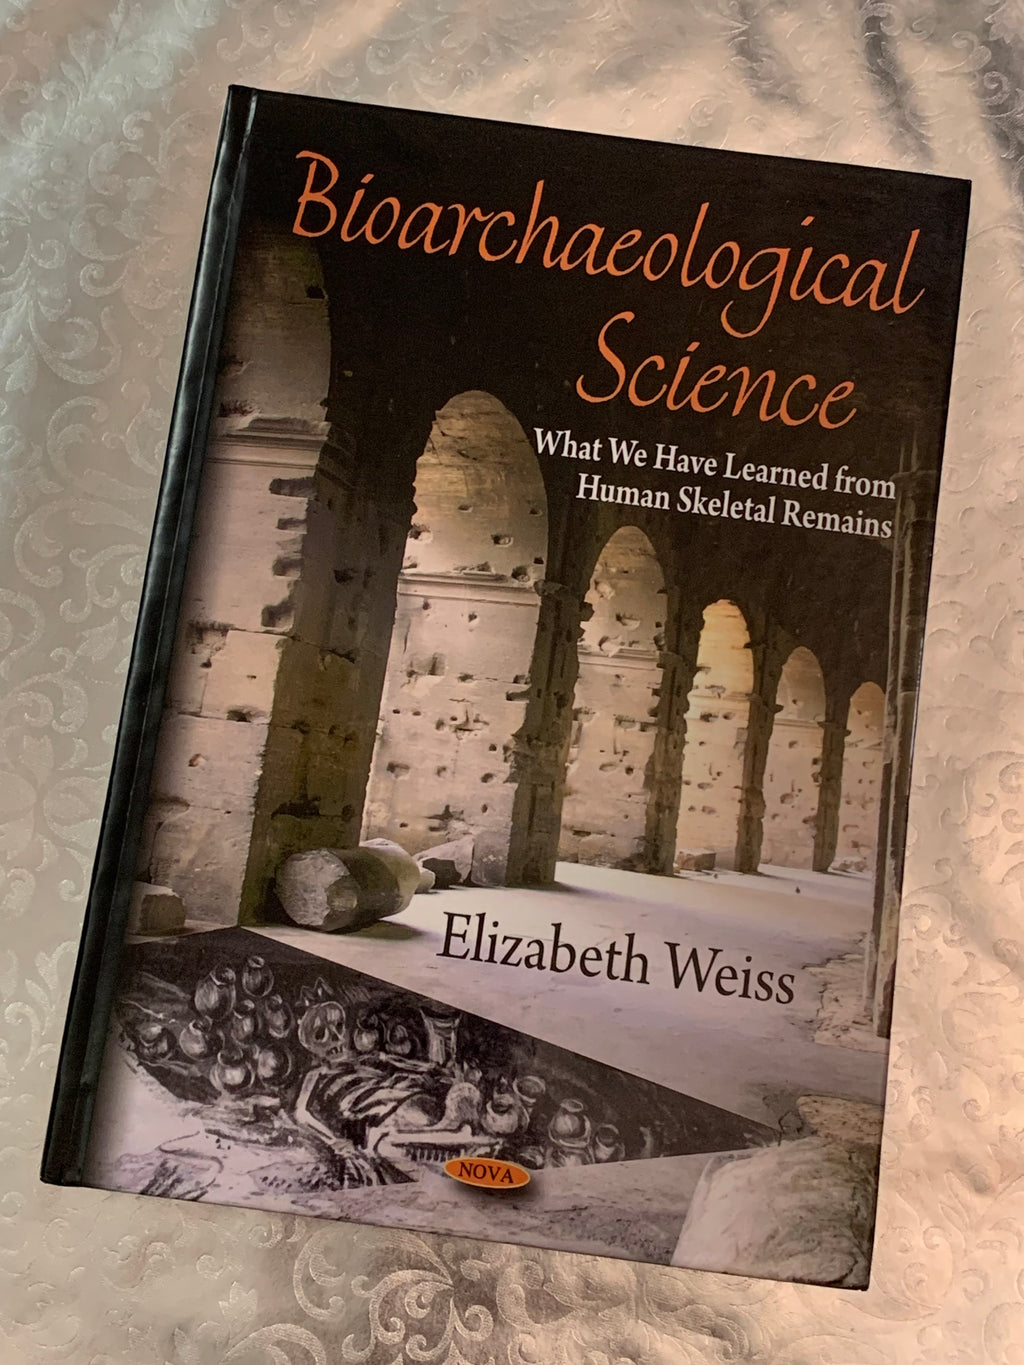 Bioarchaeological Science: What We Have Learned from Human Skeletal Remains- By Elizabeth Weiss